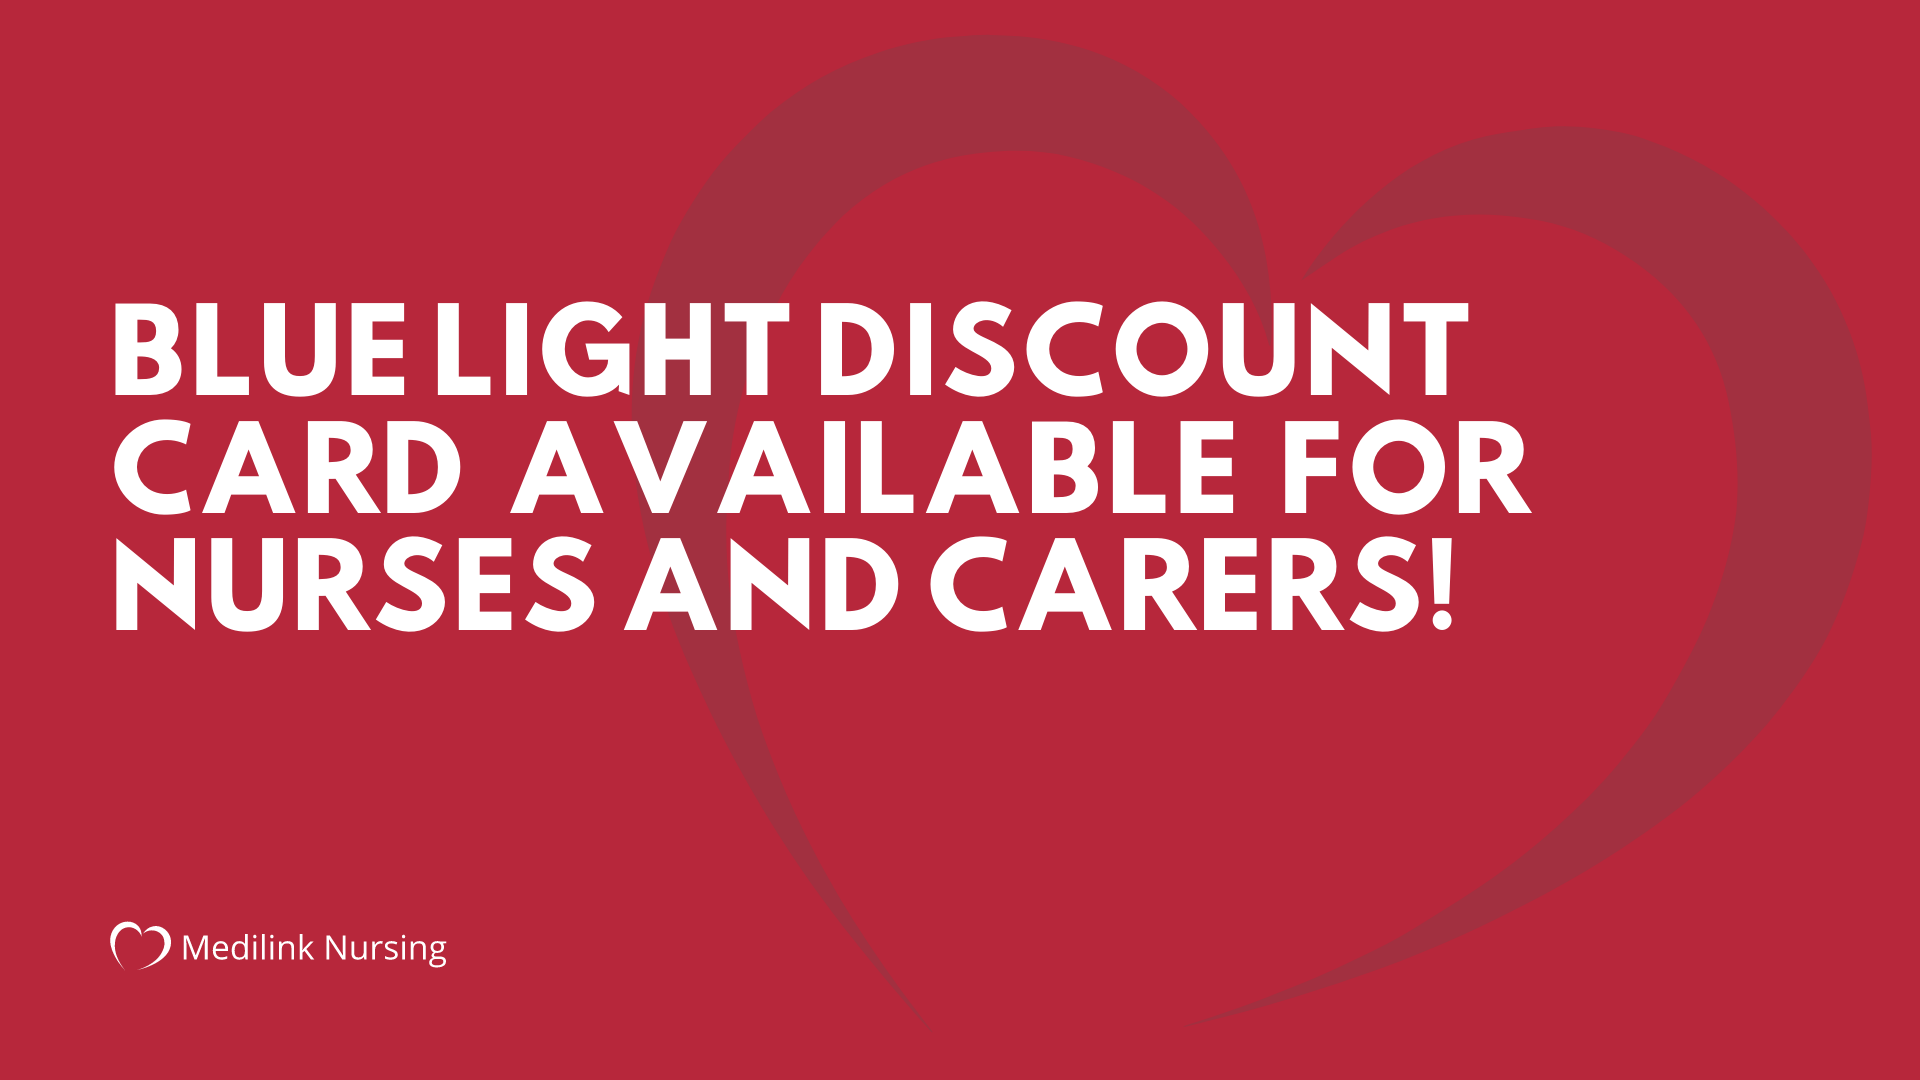 Blue Light Discount Card Available For Nurses and Carers 